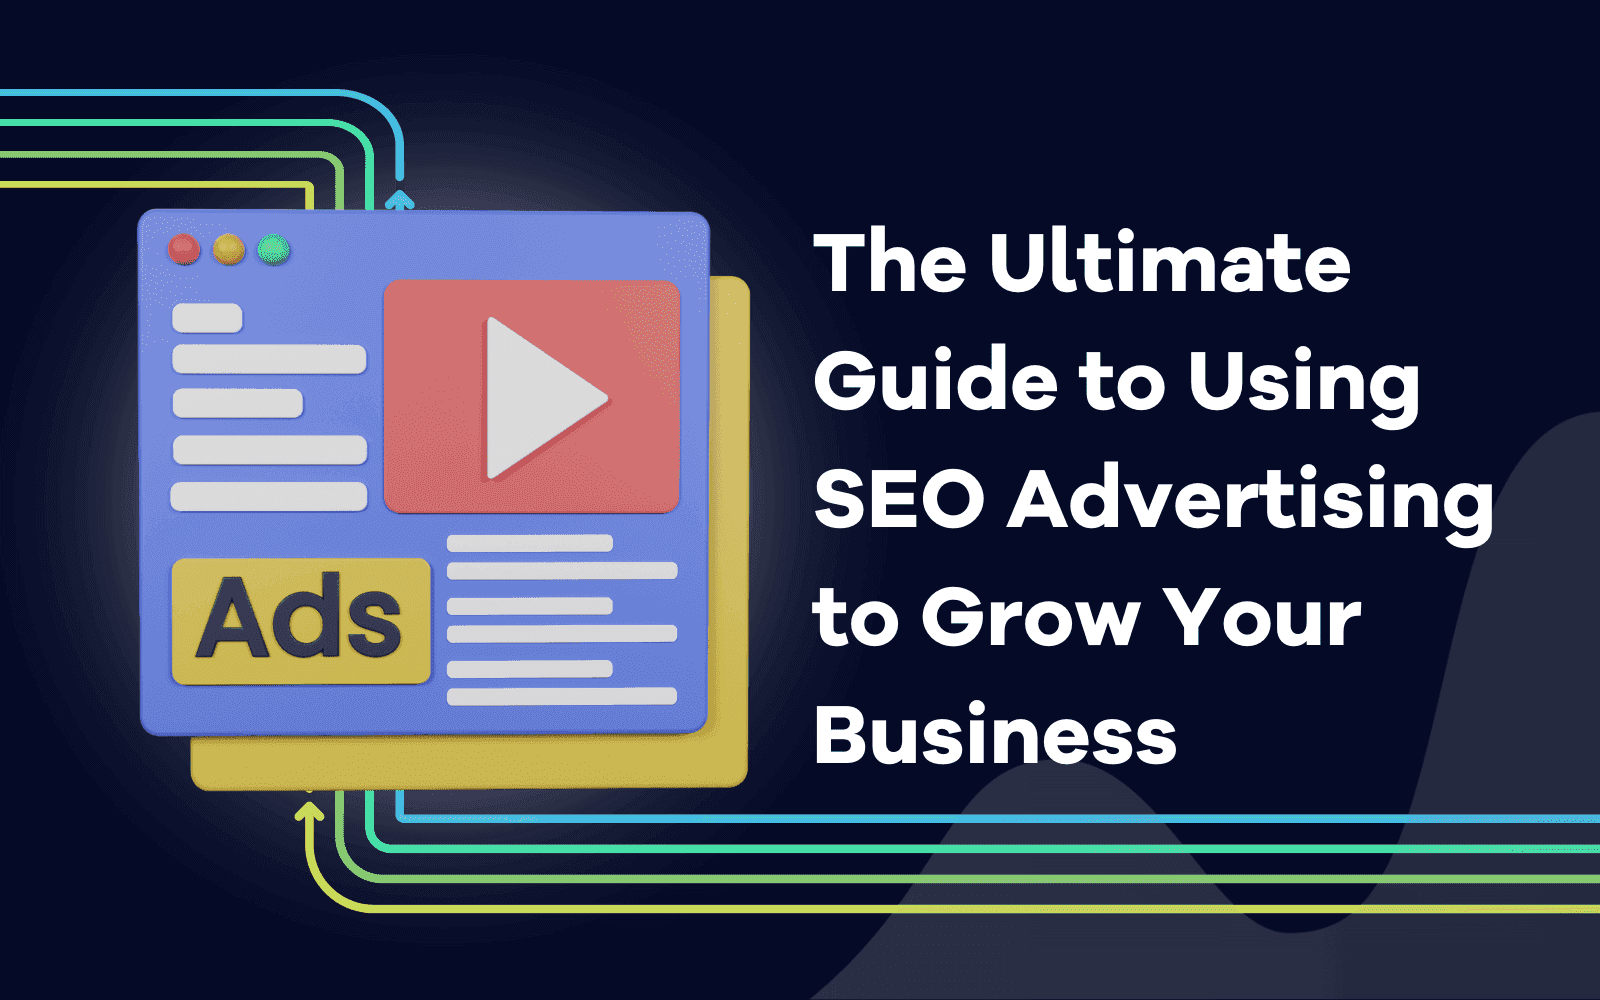 The Ultimate Guide to Using SEO Advertising to Grow Your BusinessDesign 